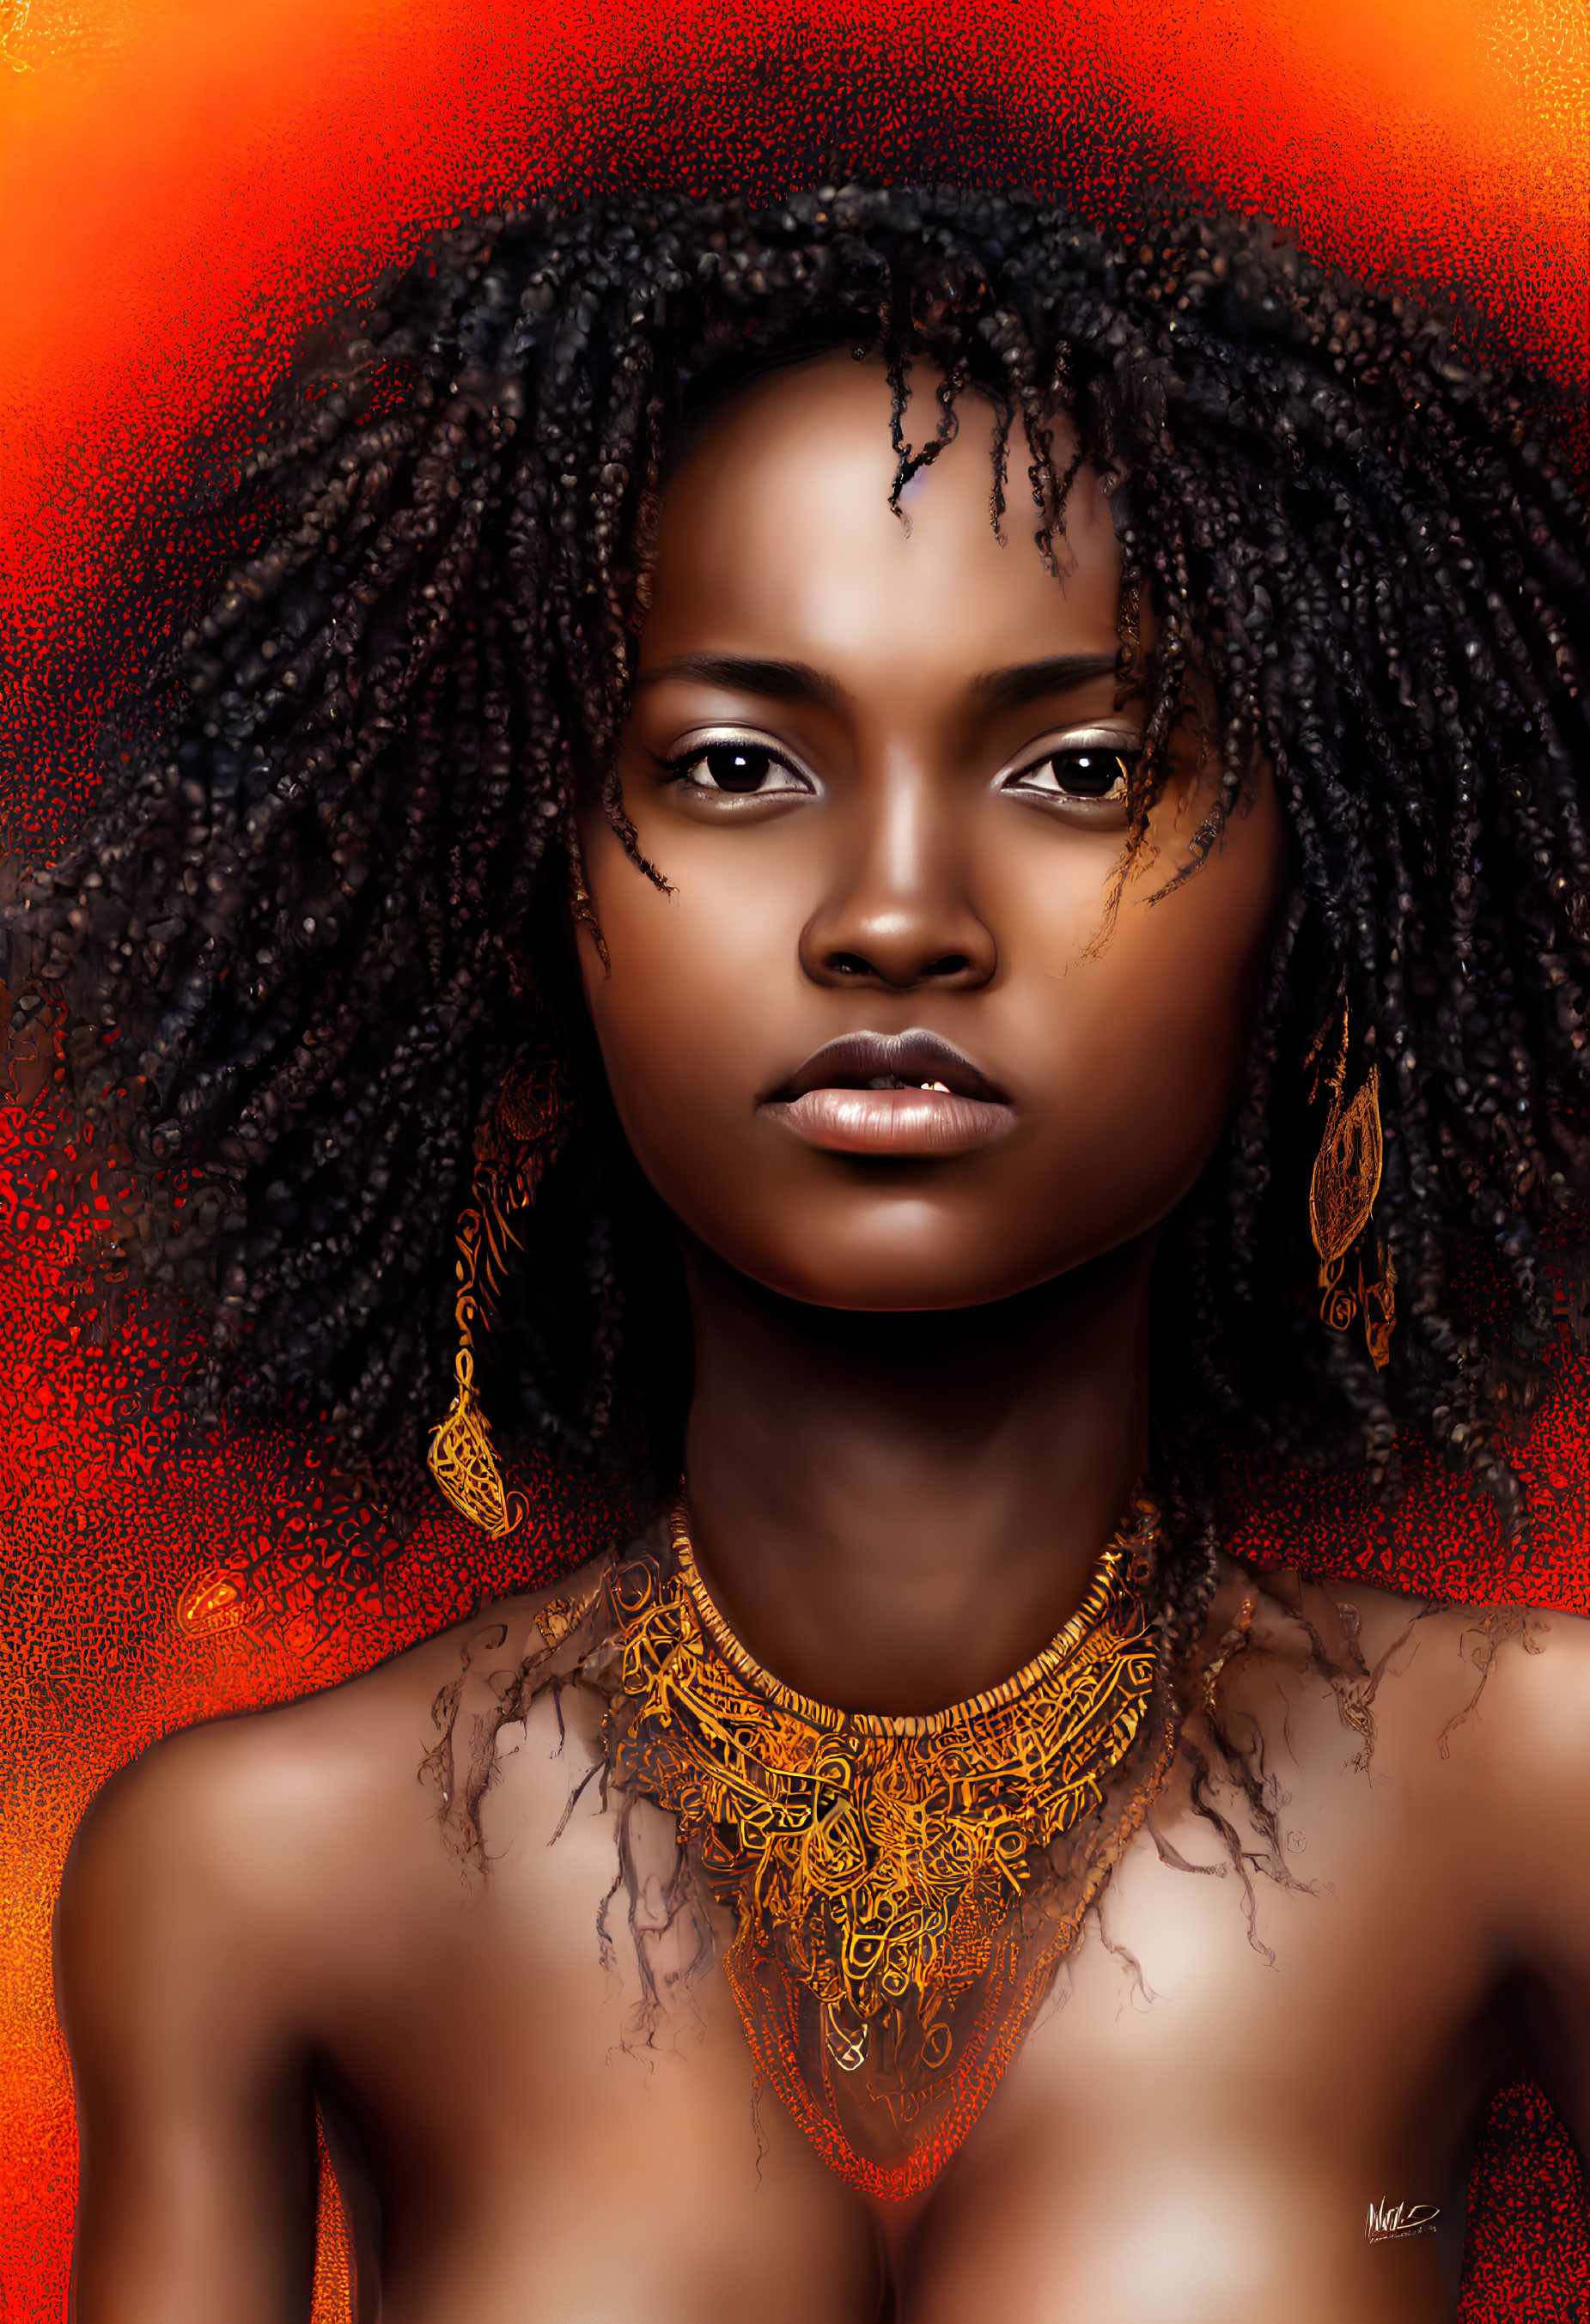 Curly-Haired Woman Portrait with Gold Jewelry on Red-Orange Background